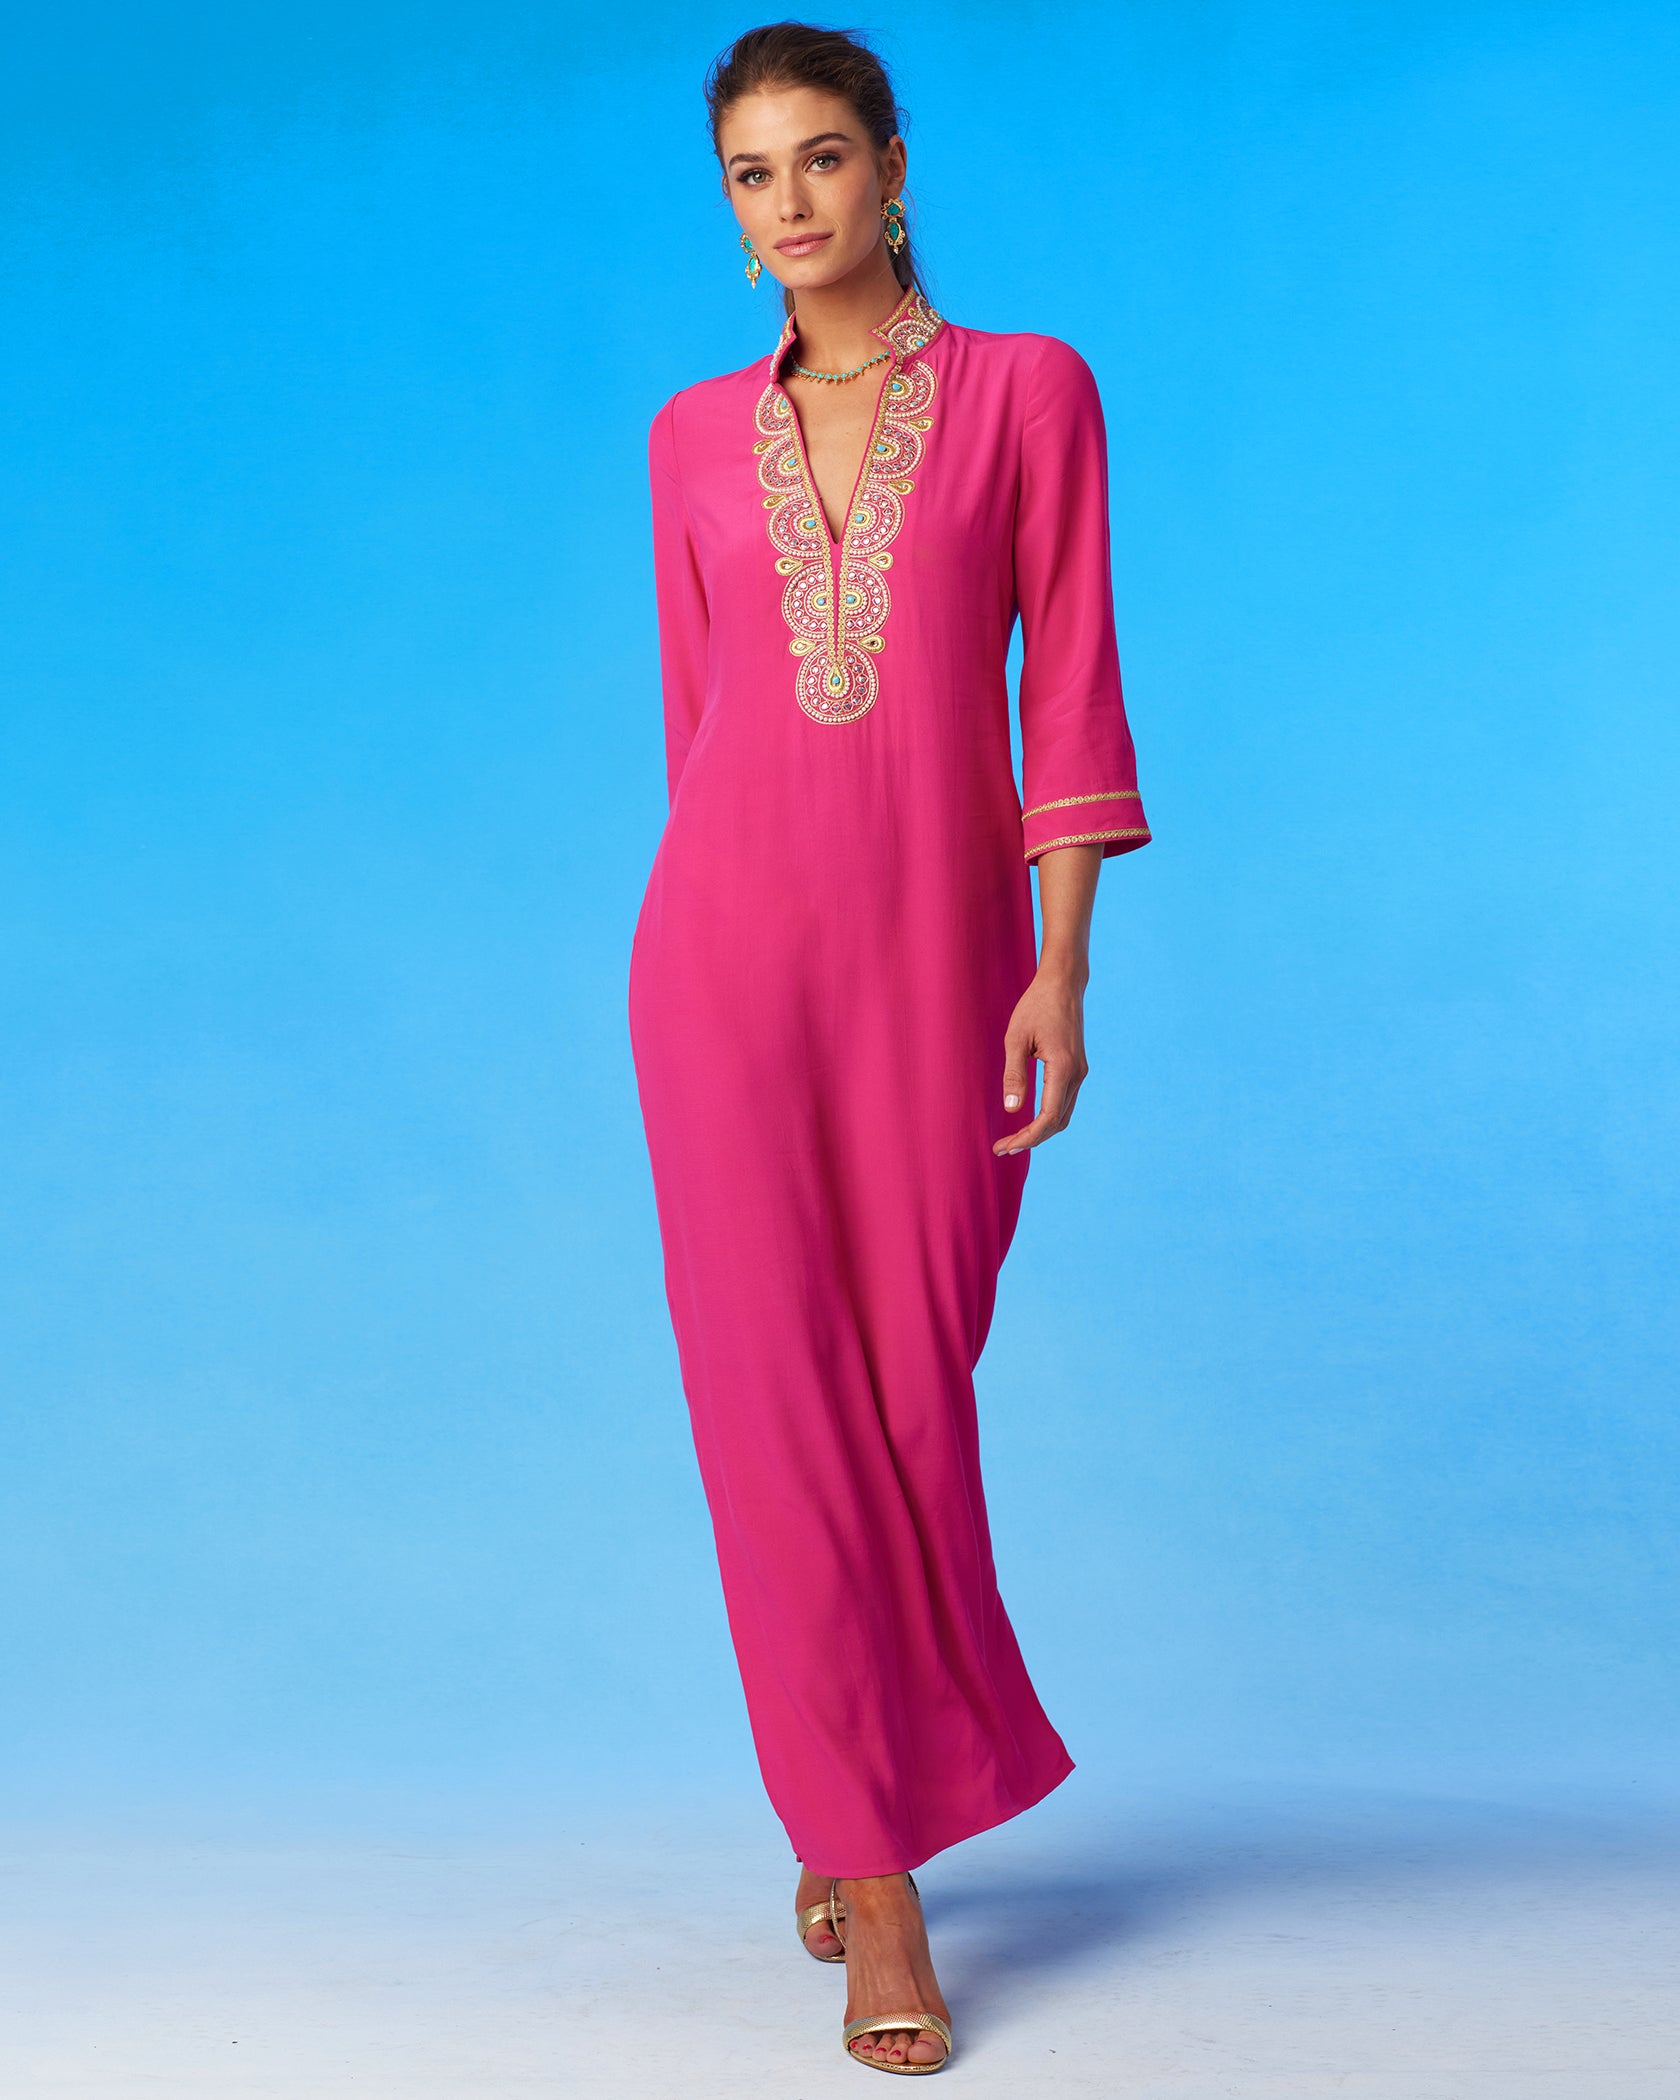 Noor Long Hot Pink Tunic Dress with Gold Embellishment-Front View